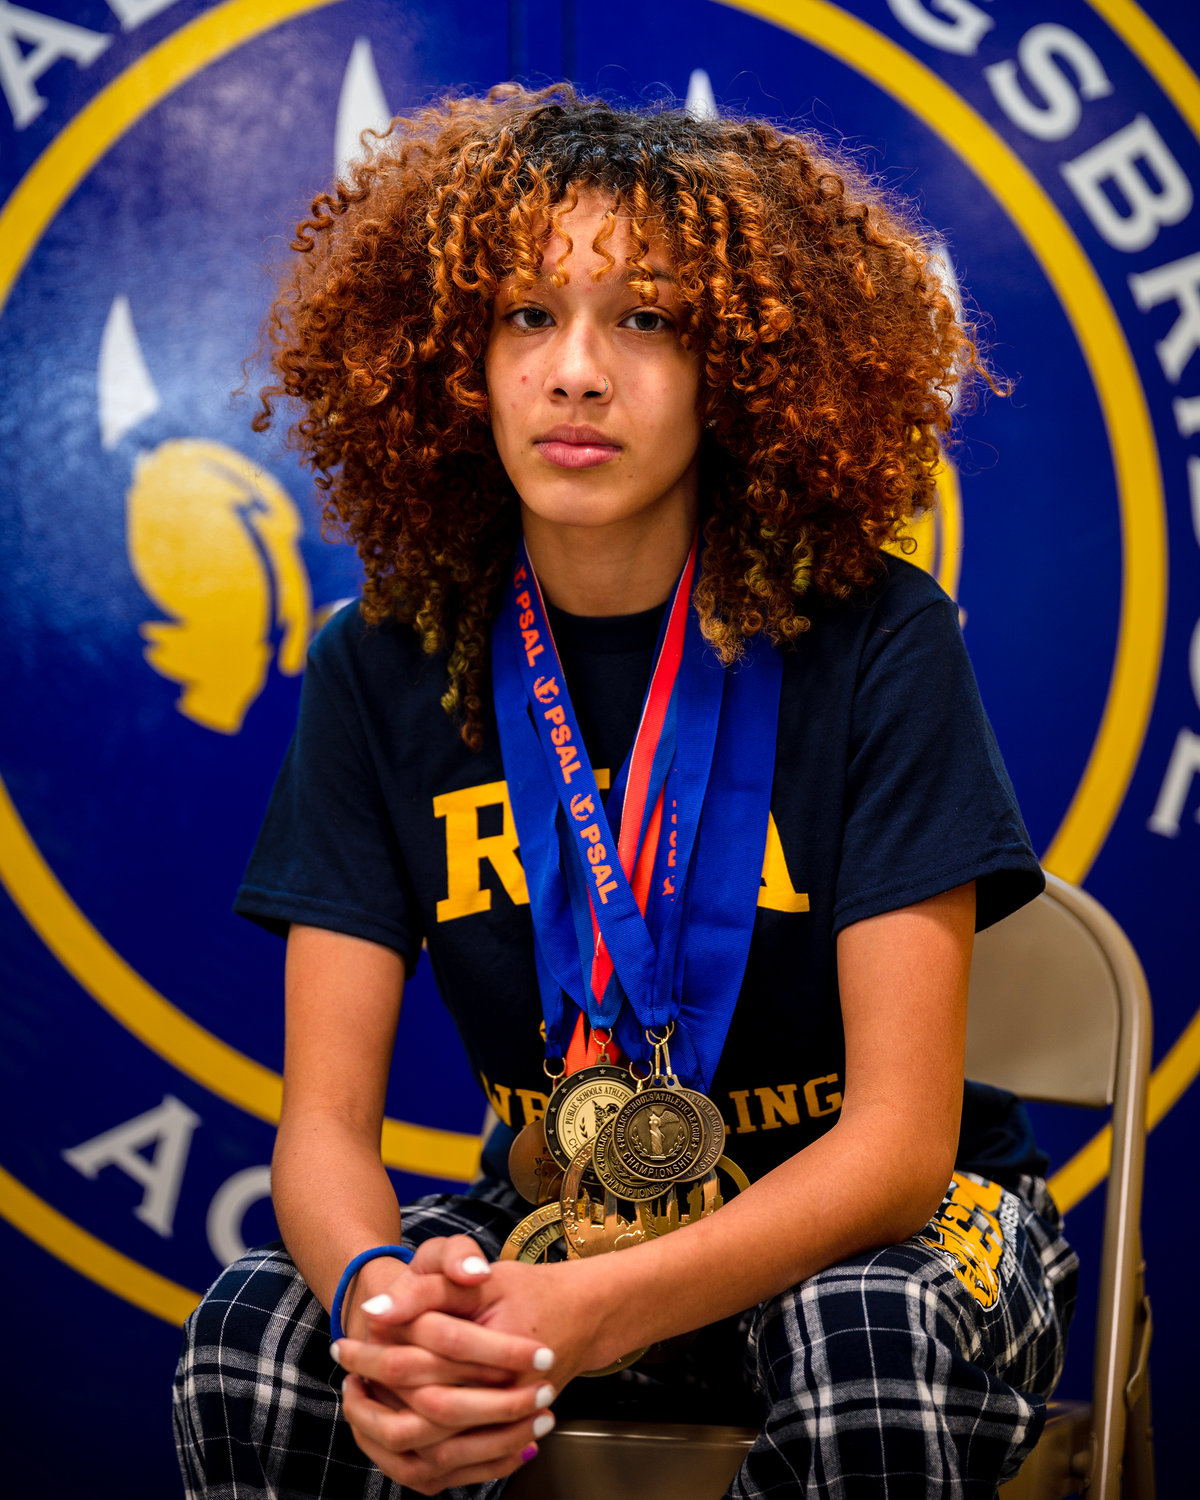 Lexi Elson has won more than a few accolades during her years as a wrestler on the boys team at RKA as her teammates can attest.